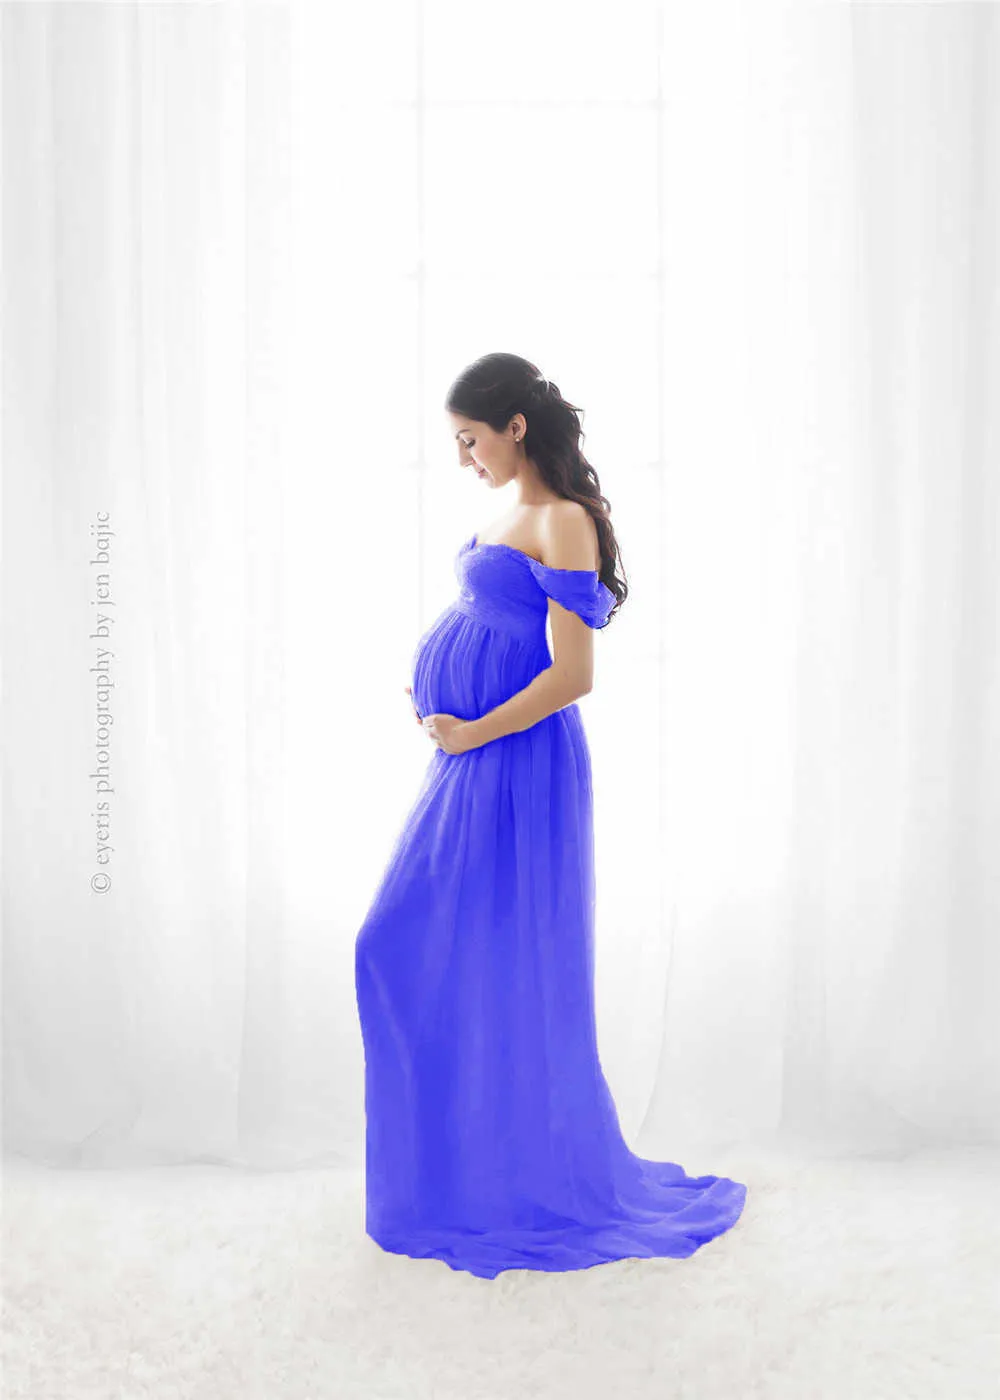 Shoulderless Maternity Dress For Photography Sexy Front Split Pregnancy Dresses For Women Maxi Maternity Gown Photo Shoots Props (4)